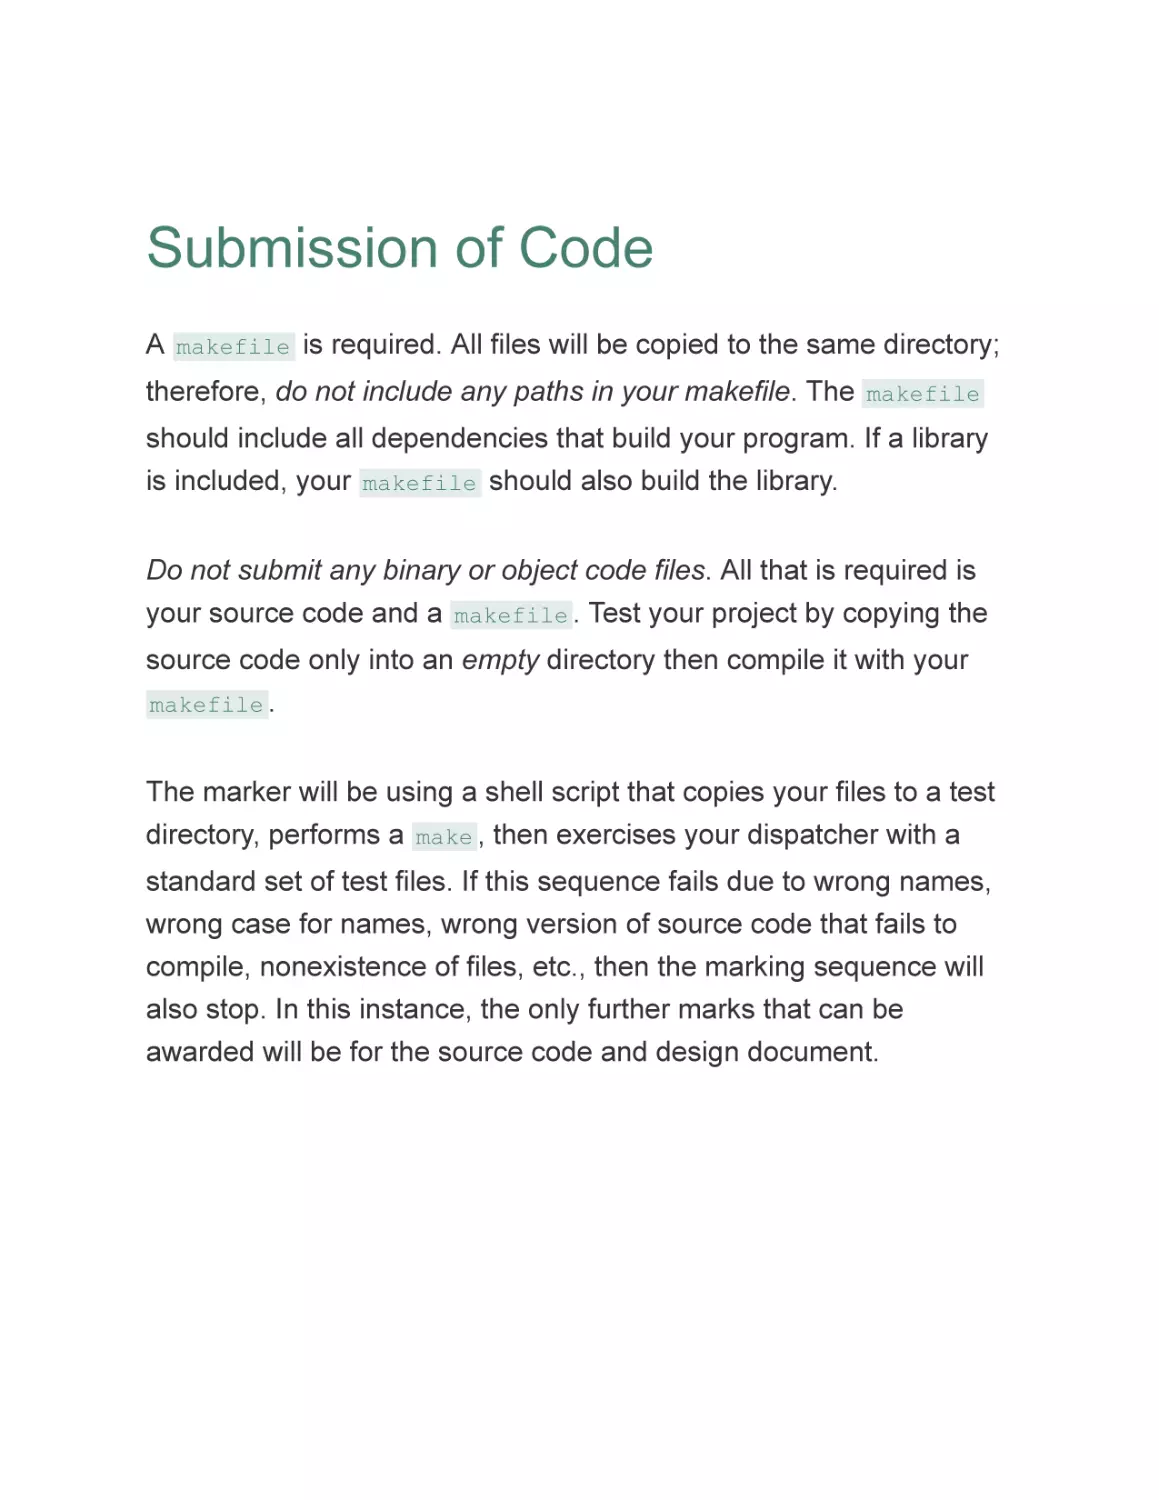 Submission of Code